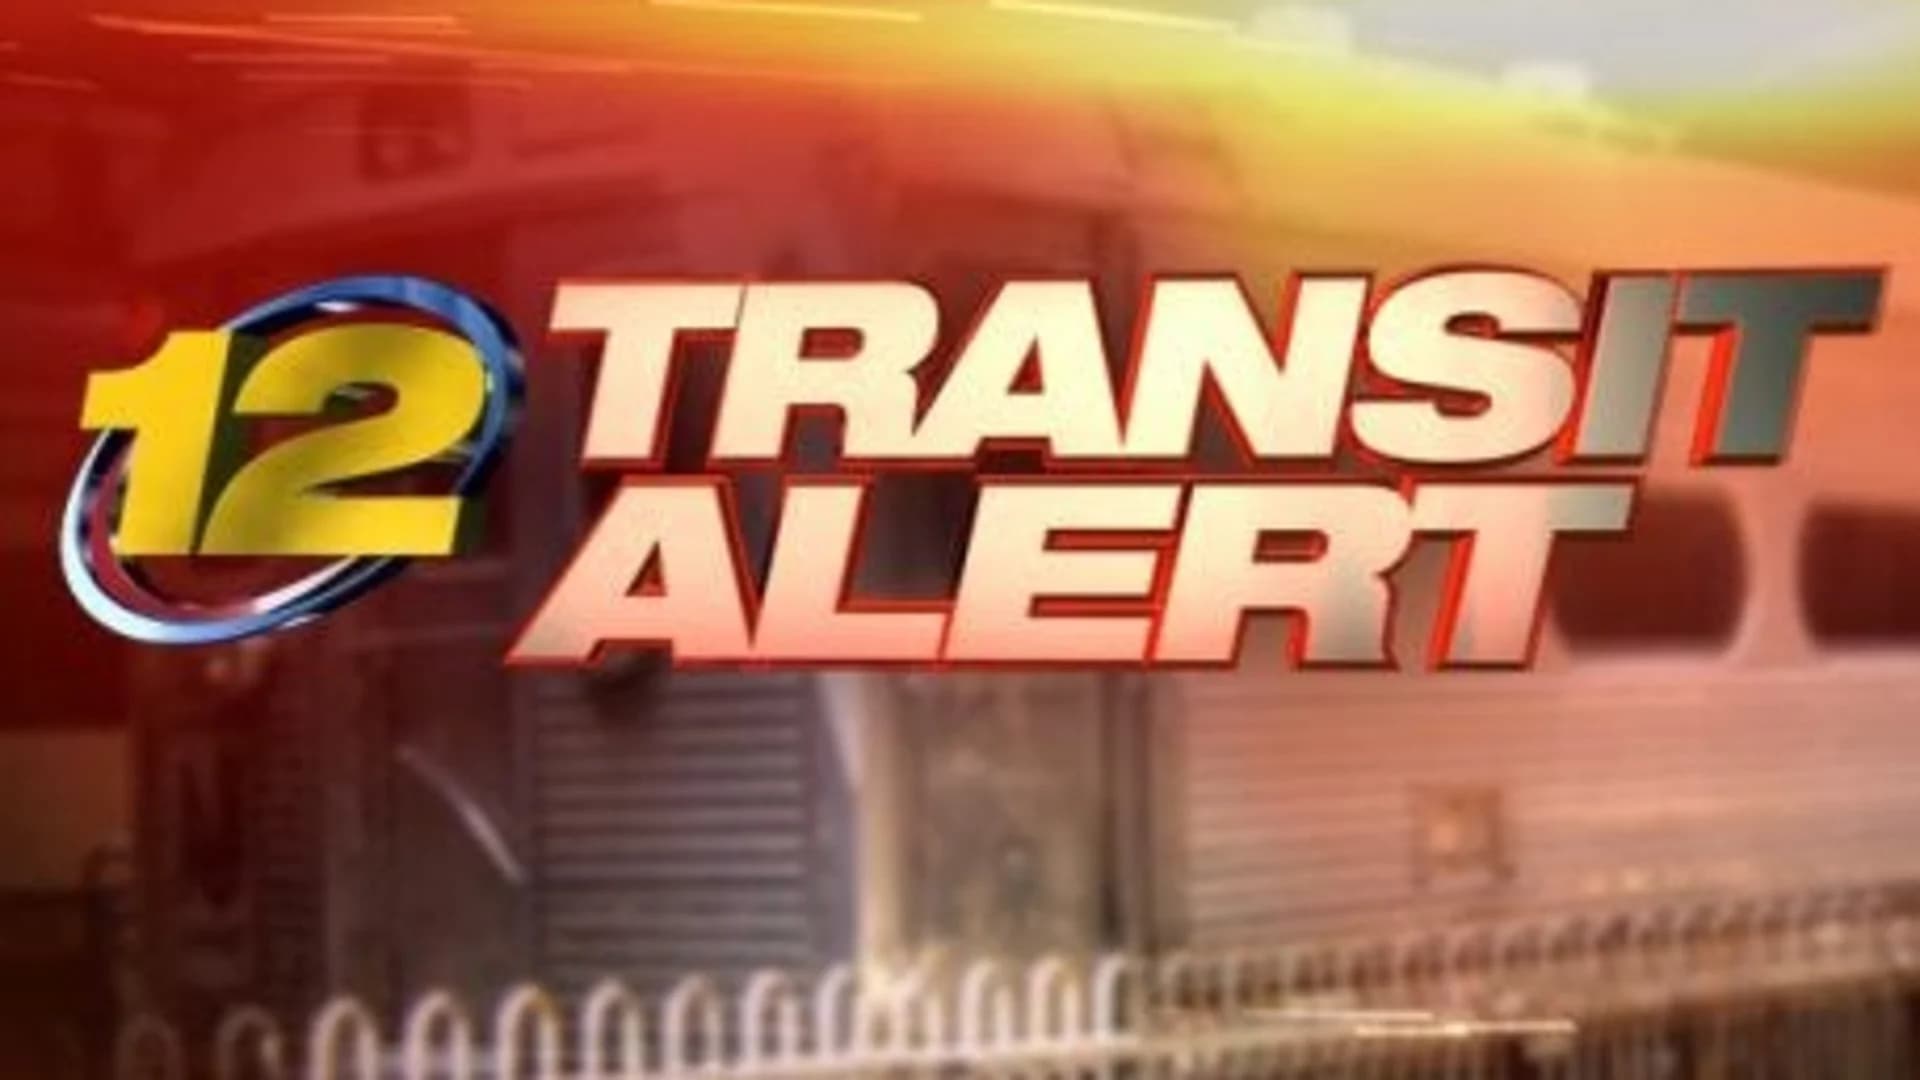 Metro-North: Residual delays on the New Haven line